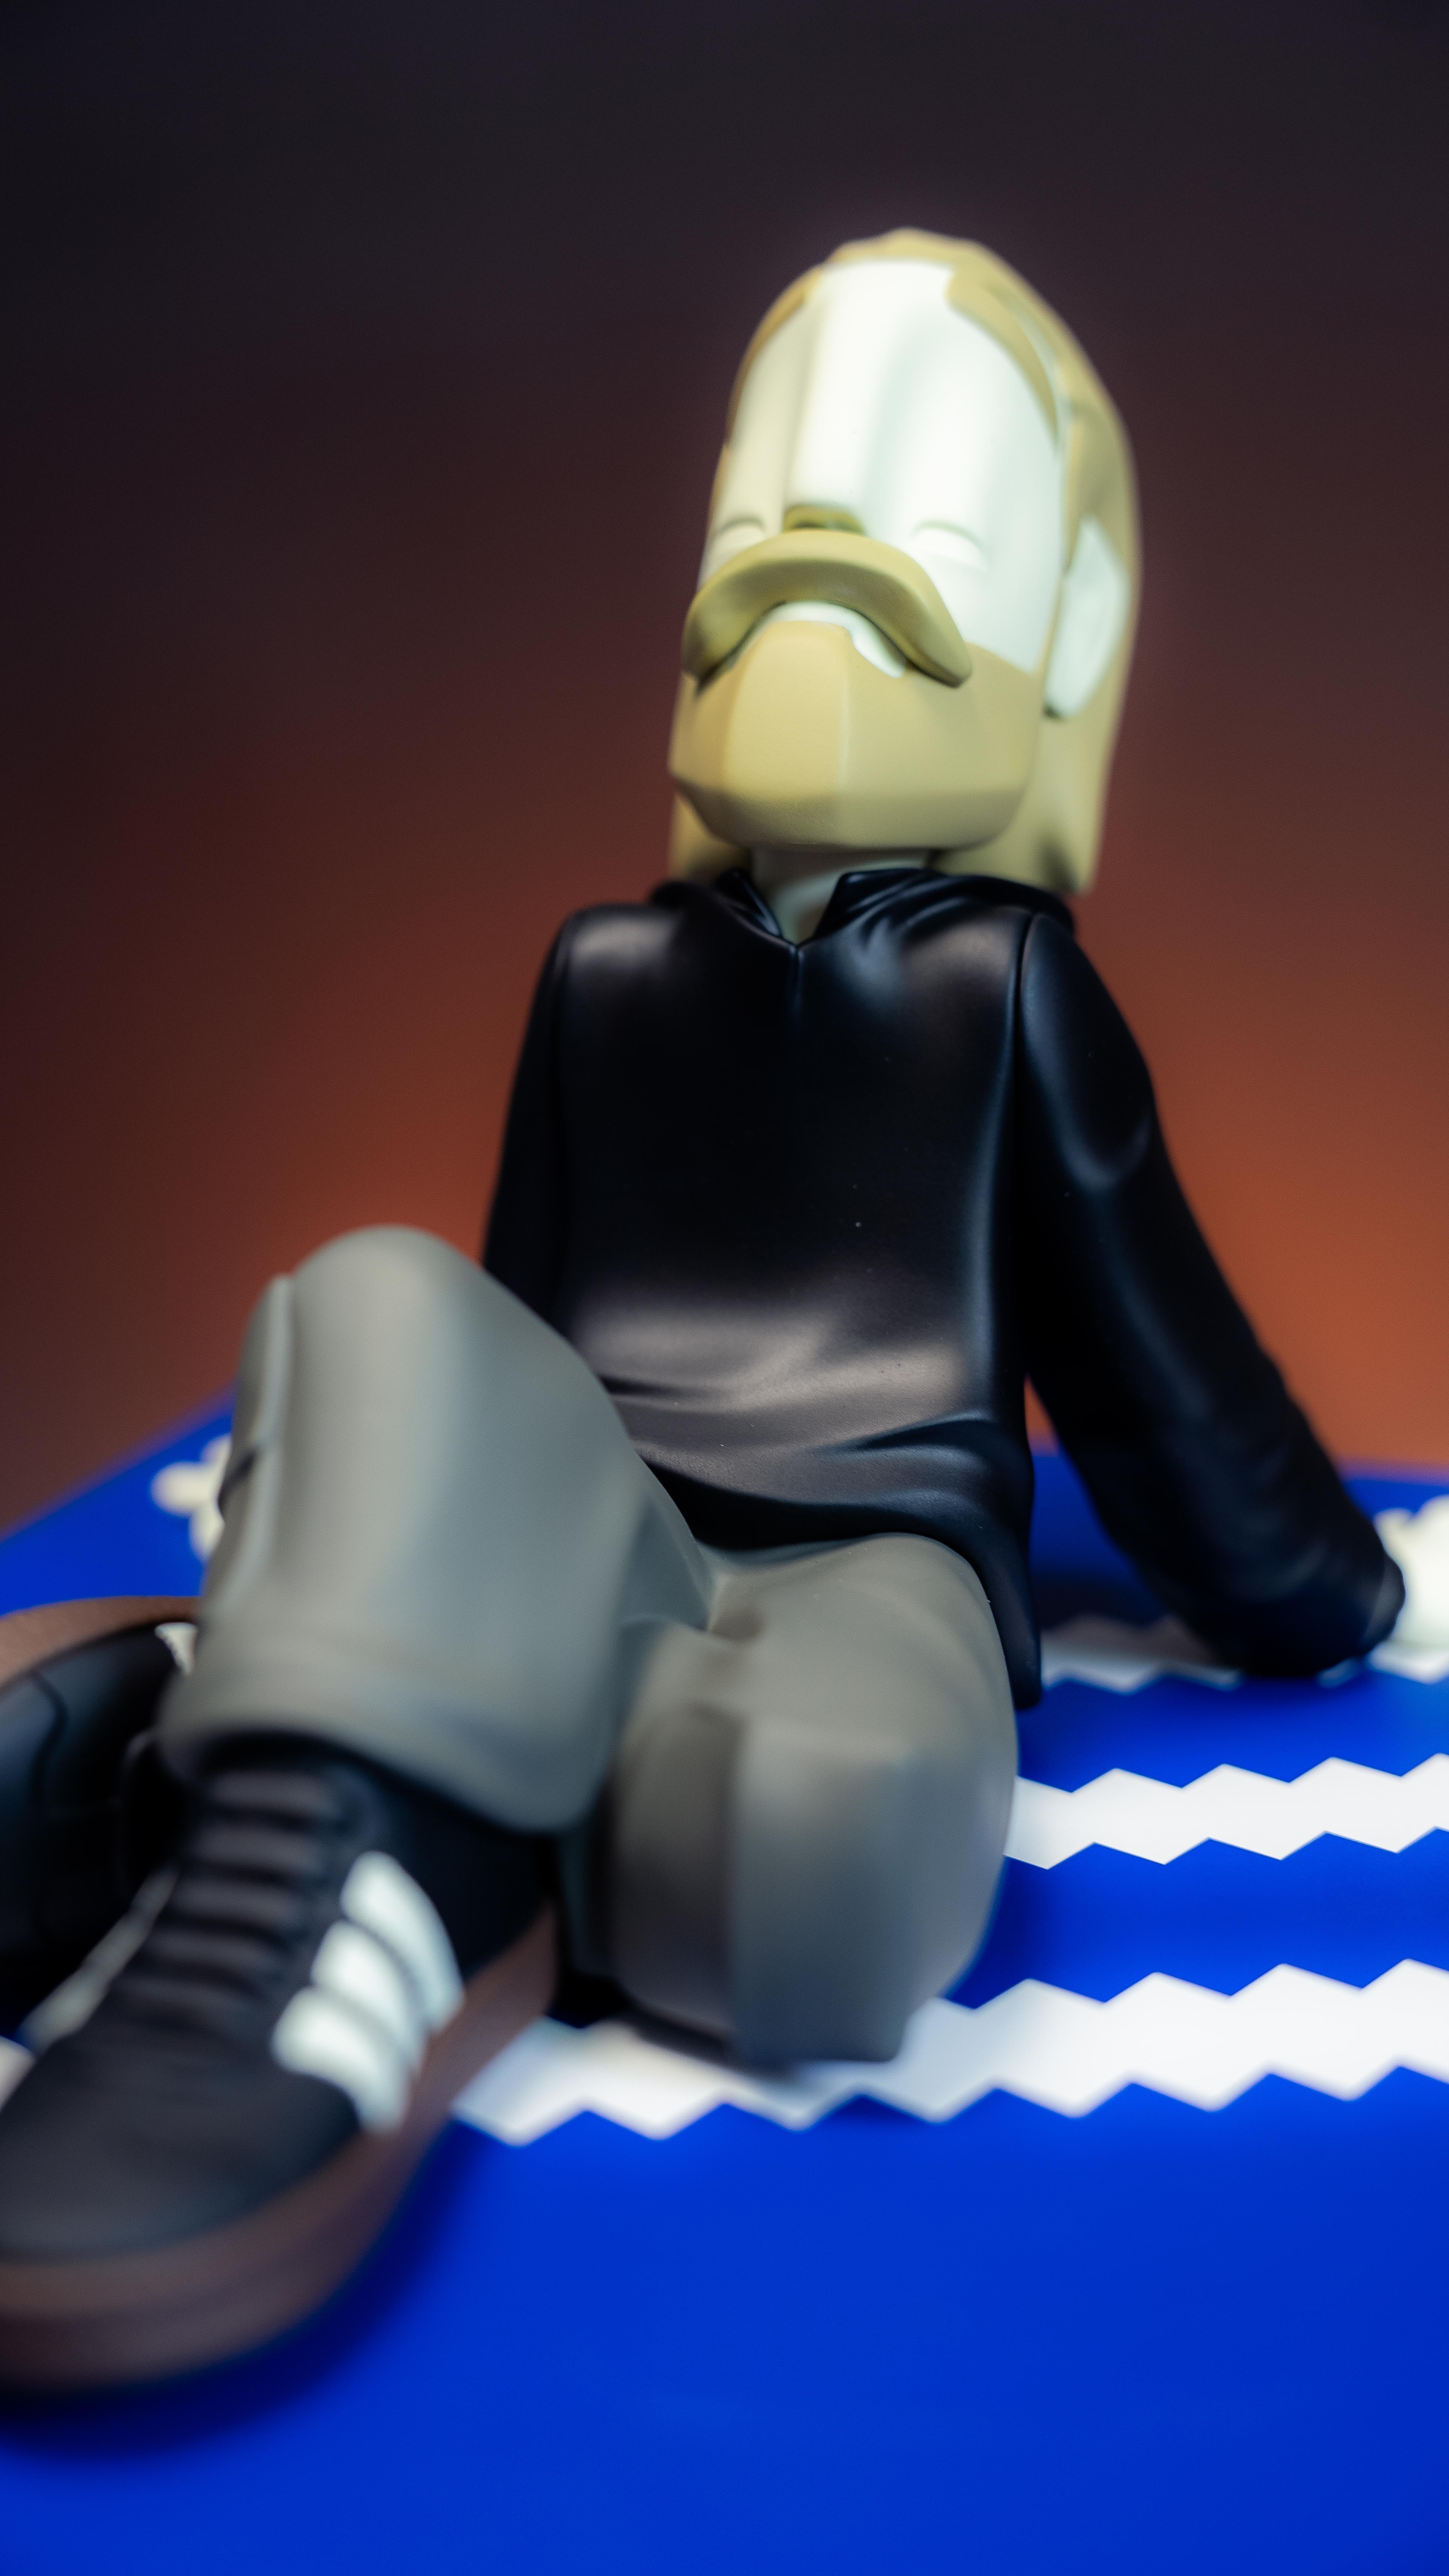 Preview image for the show titled "R "Lost in My Mind" Limied Edition Figure Release " at Tomorrow @ 12:00 AM